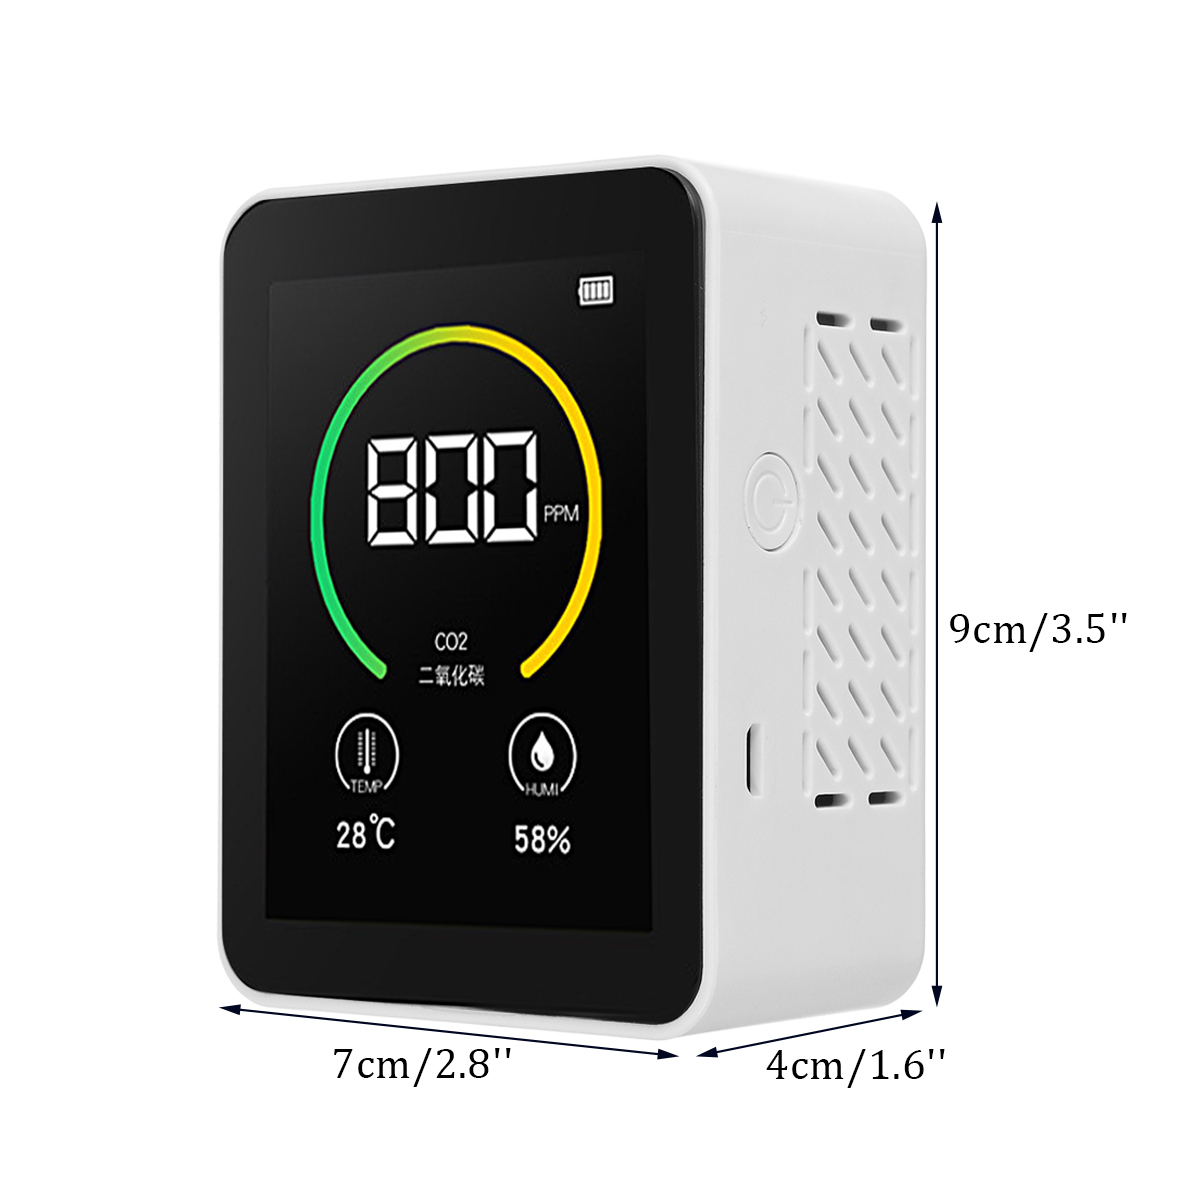 Gas-Co2-Sensor-Detector-Air-Quality-Monitor-Analyzer-W-Temperature-Humidity-Display-1822374-6